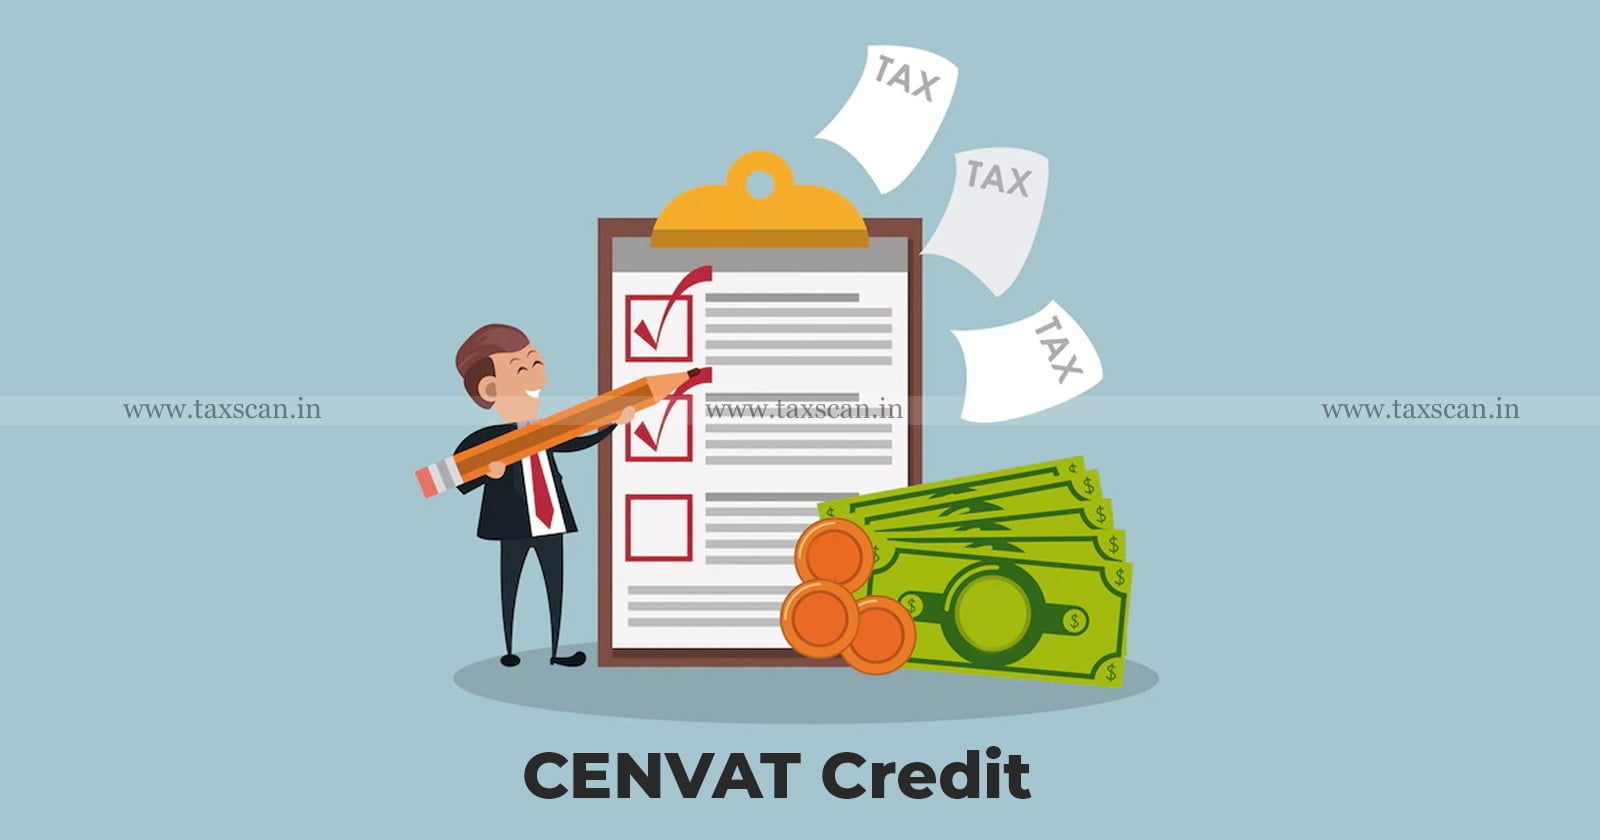 SCN - SCN based on Partial Un-official Record - Records - Recovery of fraudulently availed CENVAT Credit - CENVAT Credit - taxscan